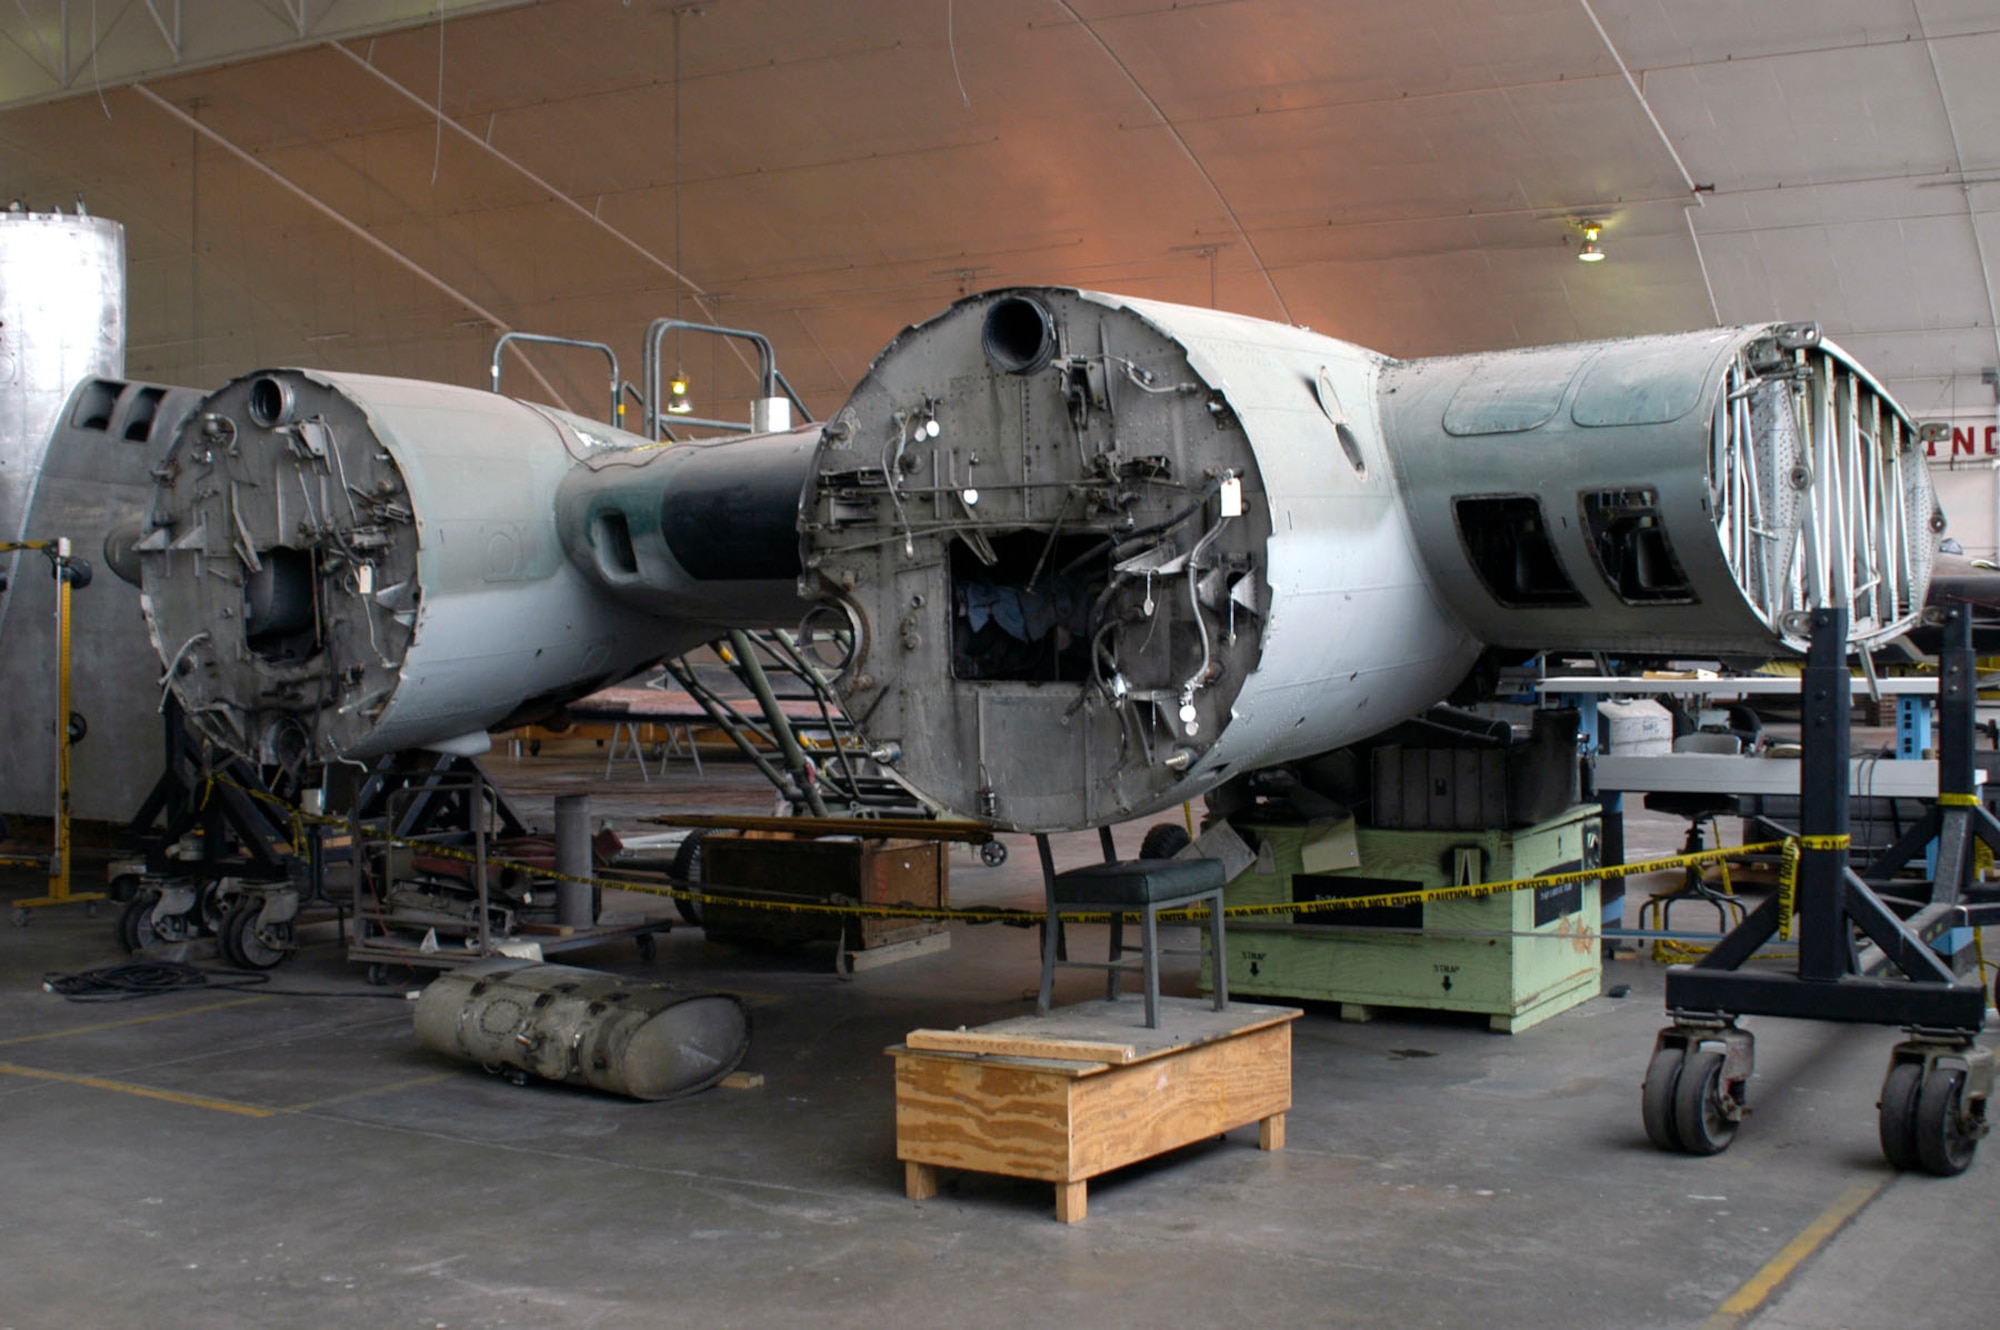 DAYTON, Ohio (10/2007) -- The B-17F "Memphis Belle" in restoration at the National Museum of the U.S. Air Force. (U.S. Air Force photo)